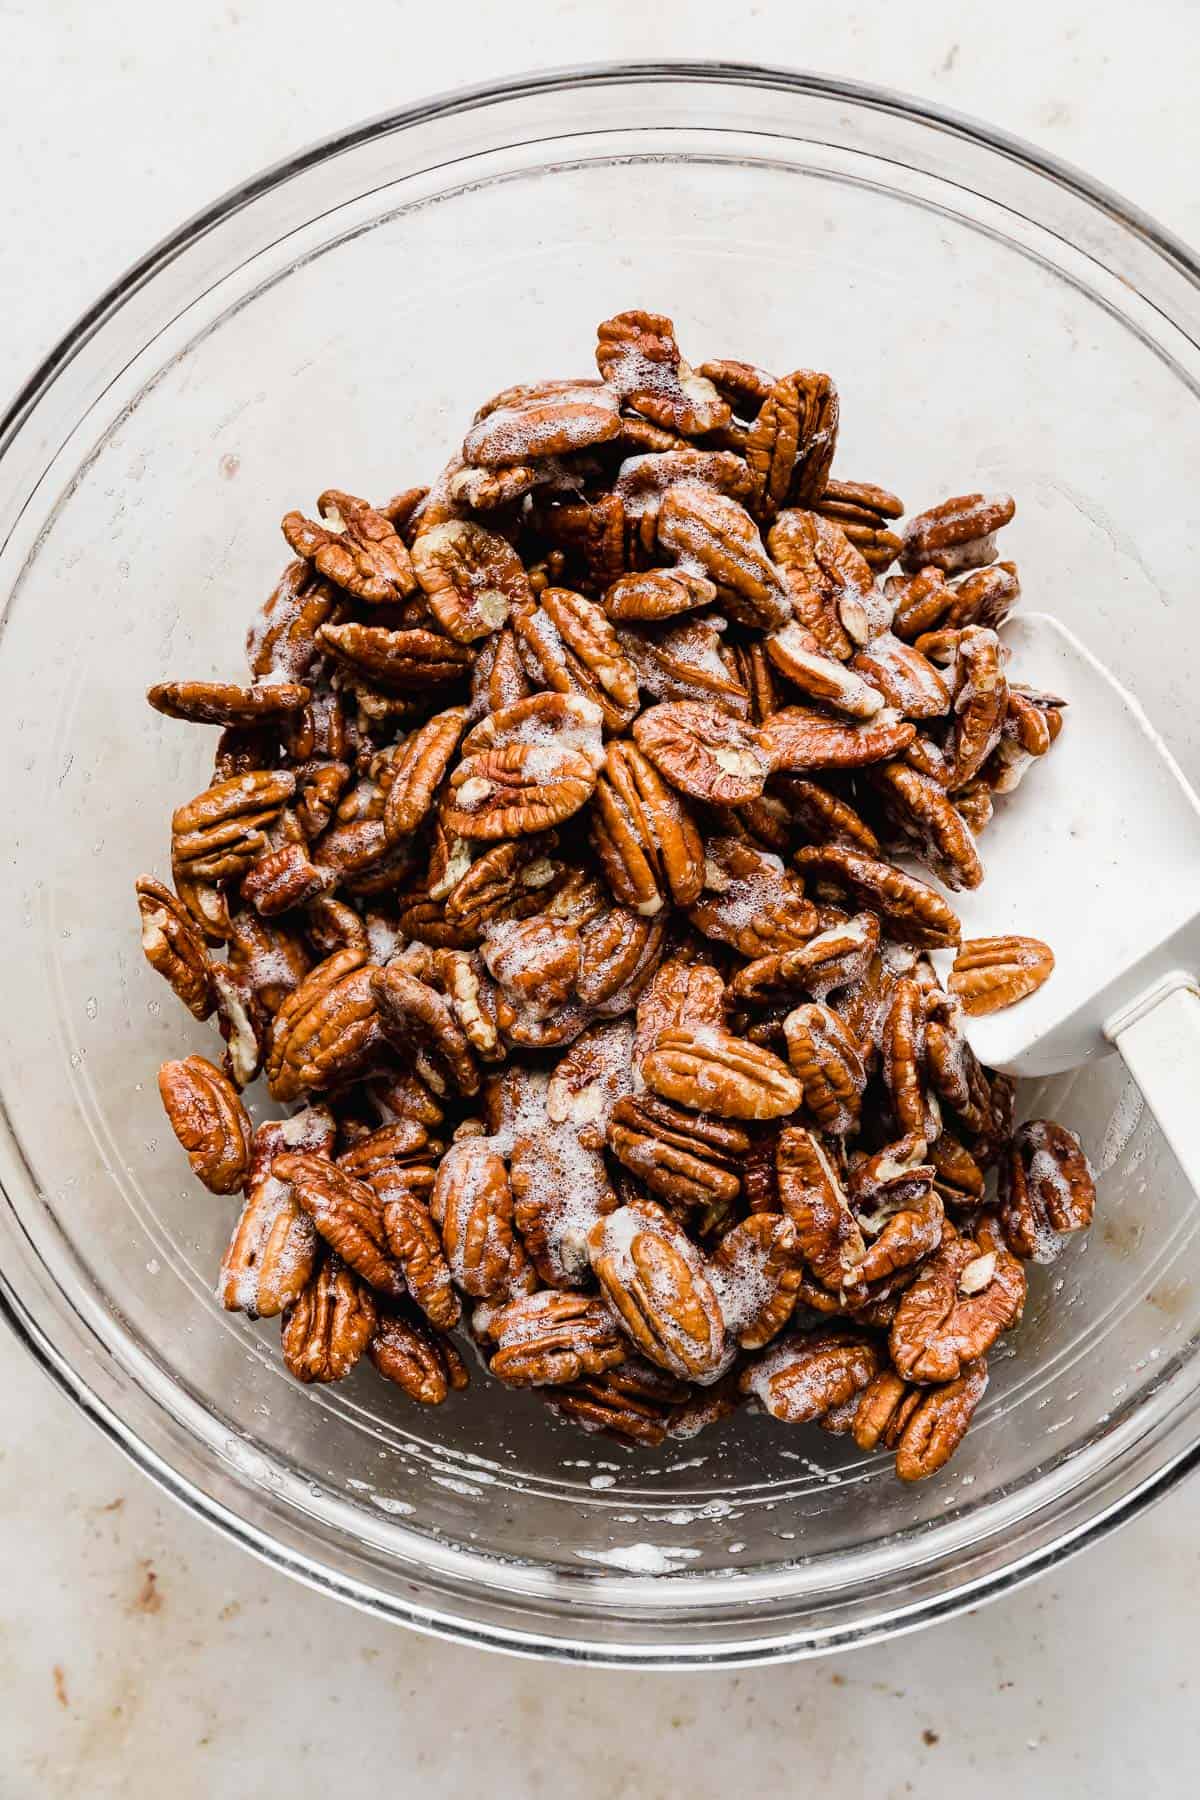 Raw pecans being mixed in frothy egg whites.